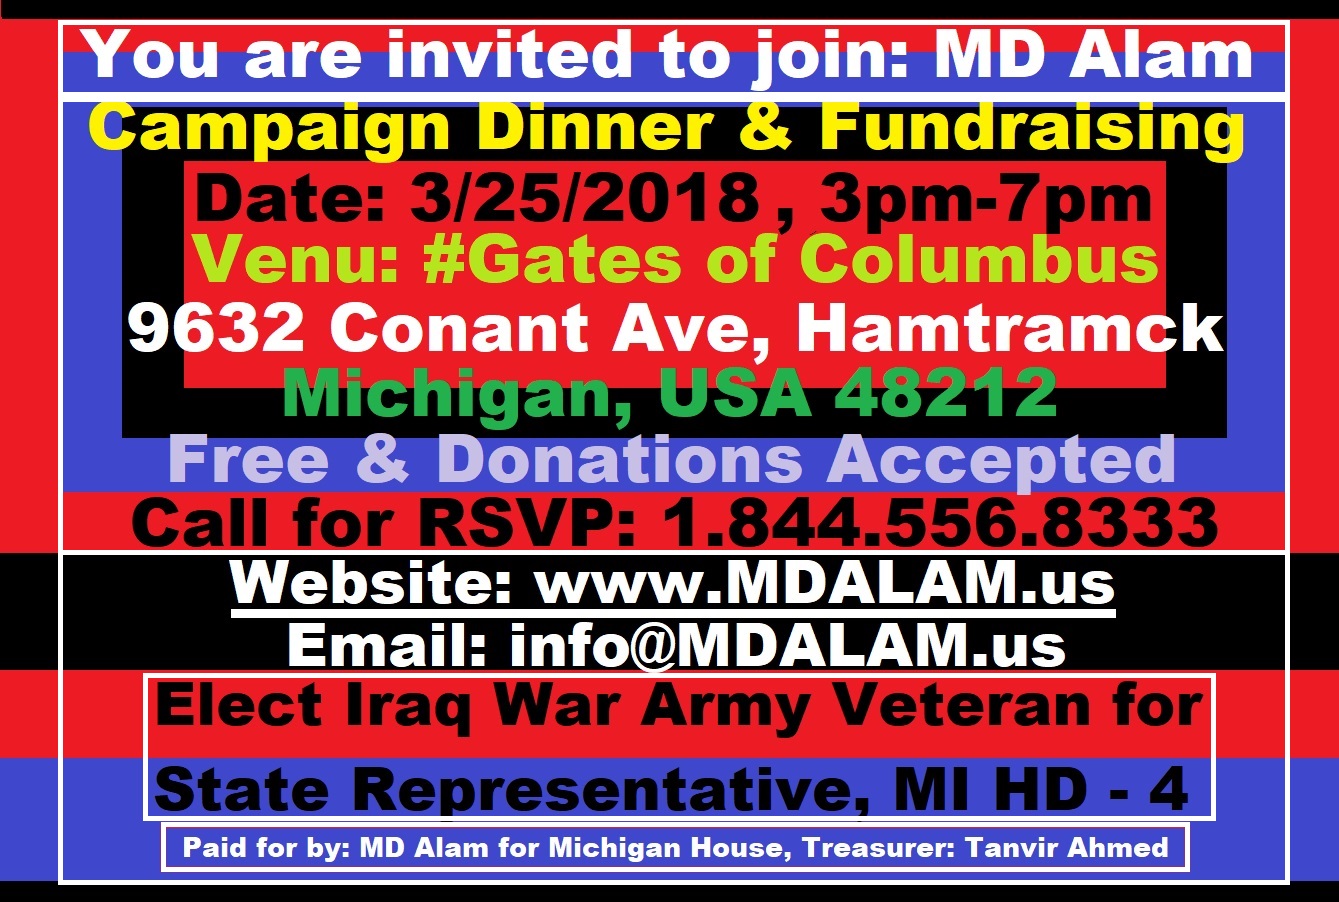 MD Alam Fundraising and Campaign Dinner event on 3/25/2018